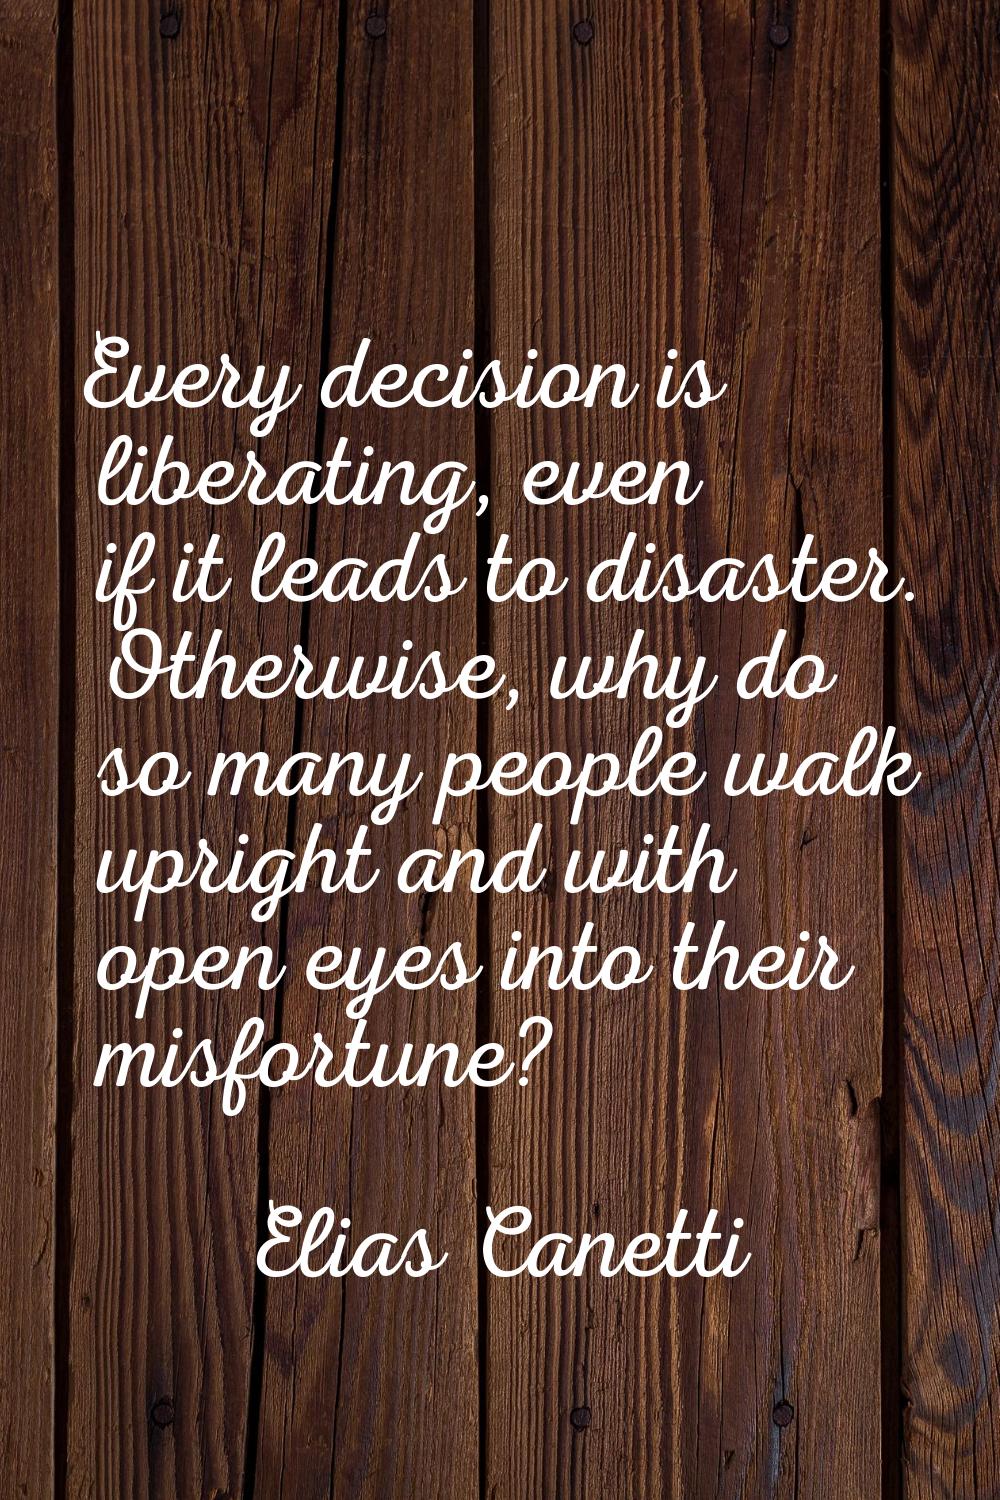 Every decision is liberating, even if it leads to disaster. Otherwise, why do so many people walk u